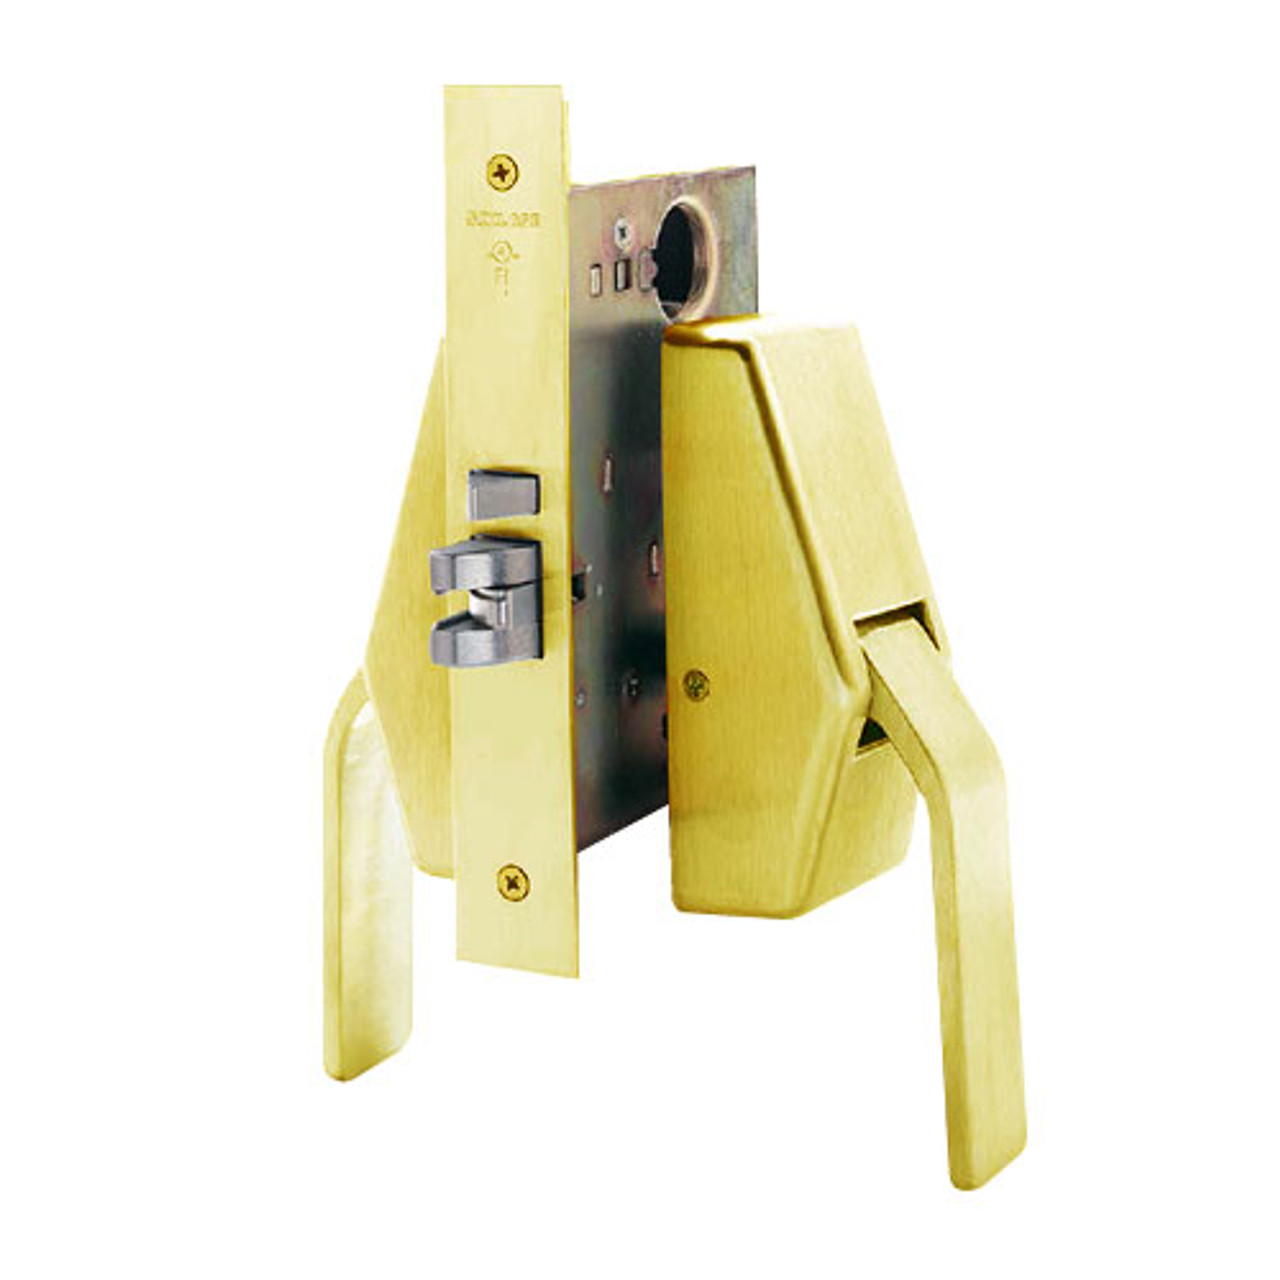 HL6-9040-605 Glynn Johnson HL6 Series Privacy Thumbturn Function Push and Pull latch with Mortise Lock in Bright Brass Finish